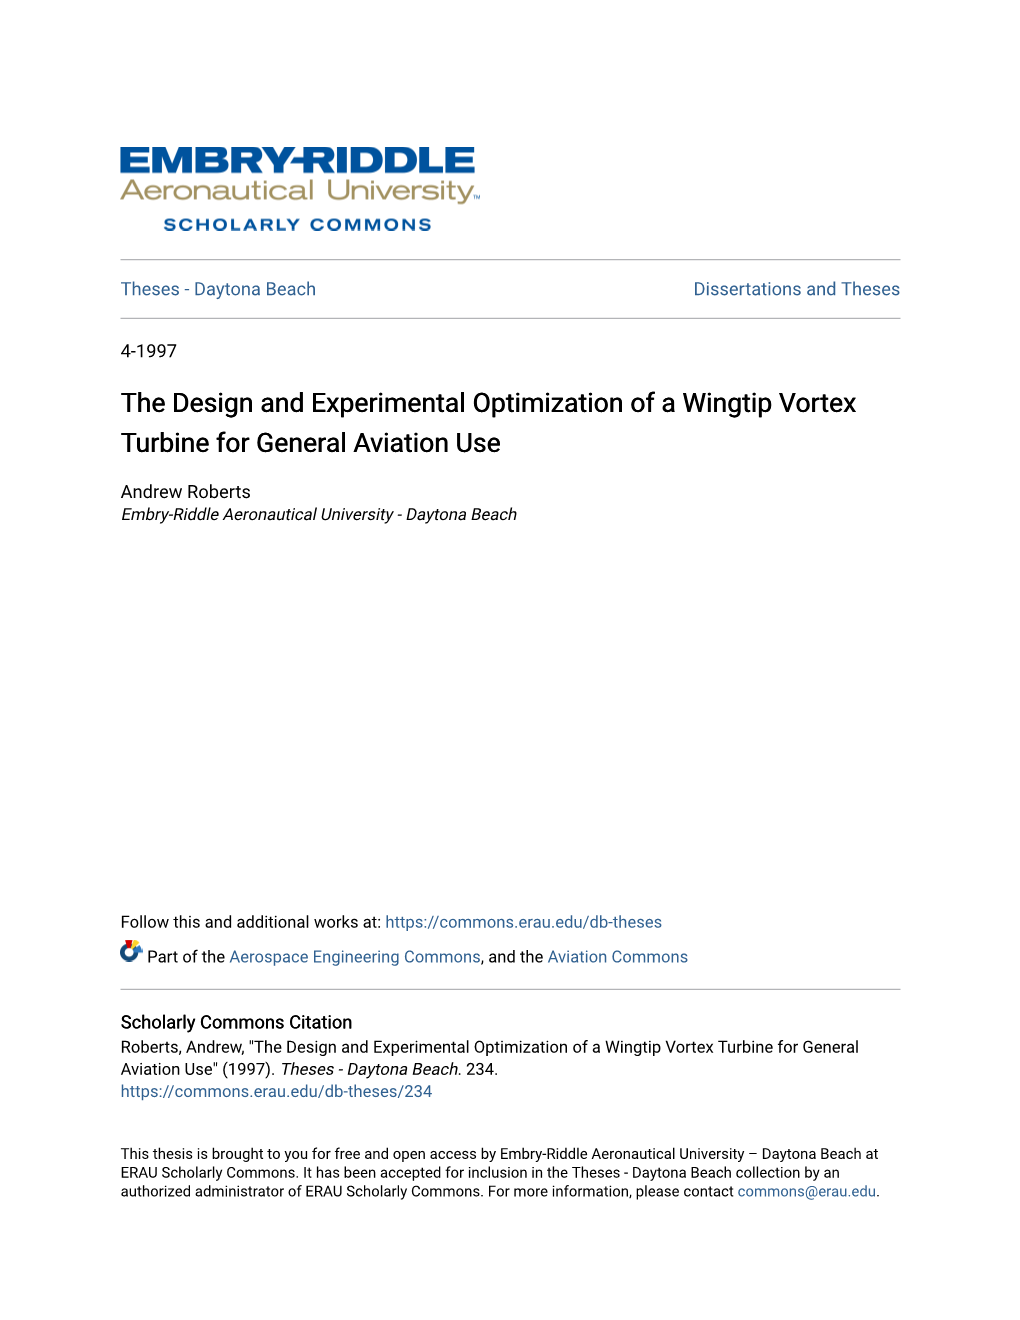 The Design and Experimental Optimization of a Wingtip Vortex Turbine for General Aviation Use